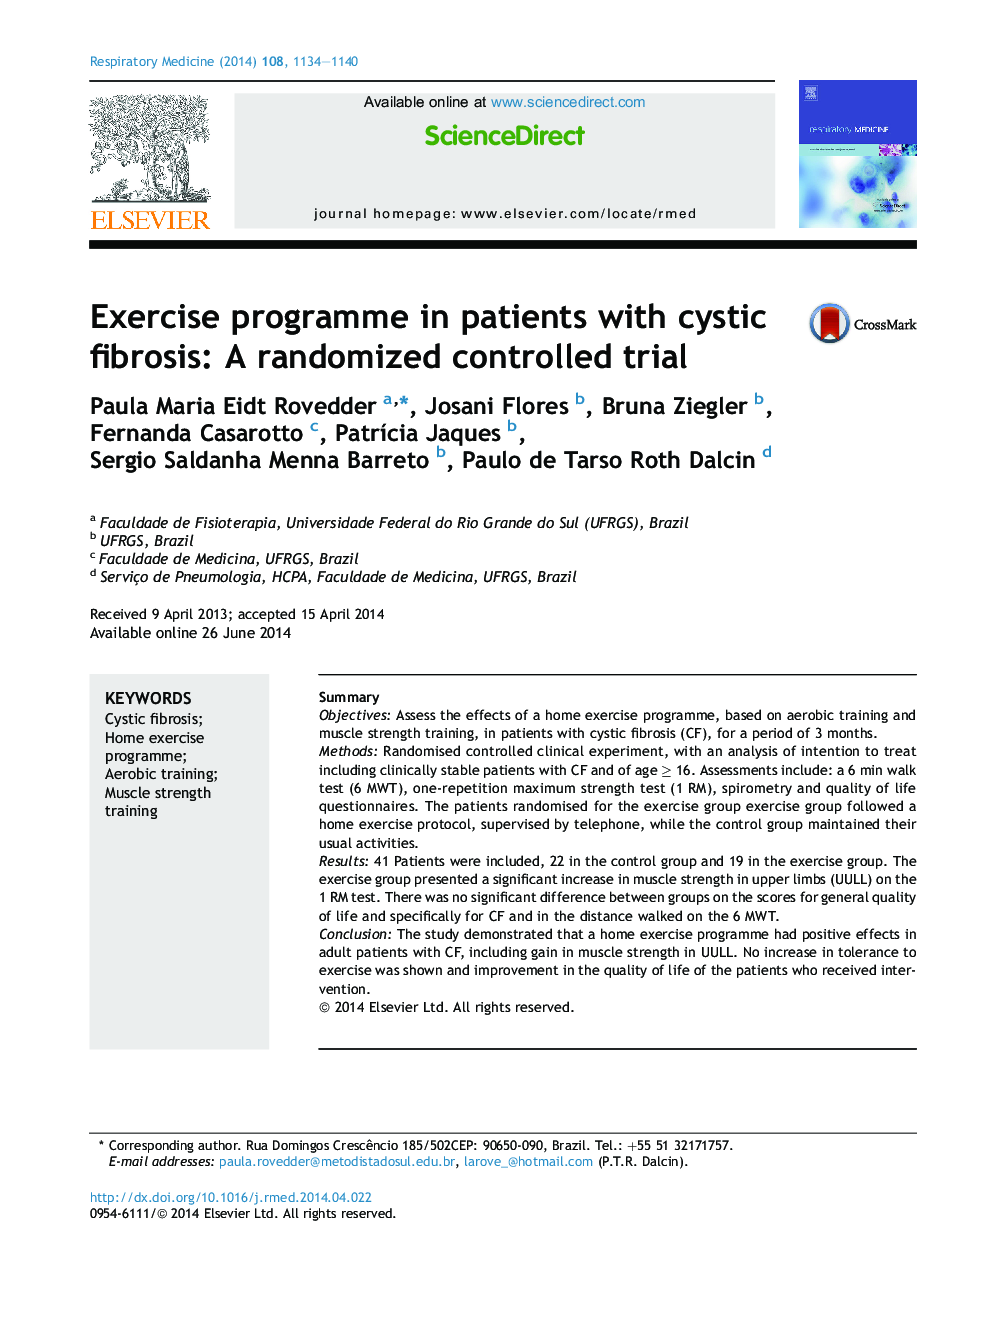 Exercise programme in patients with cystic fibrosis: A randomized controlled trial